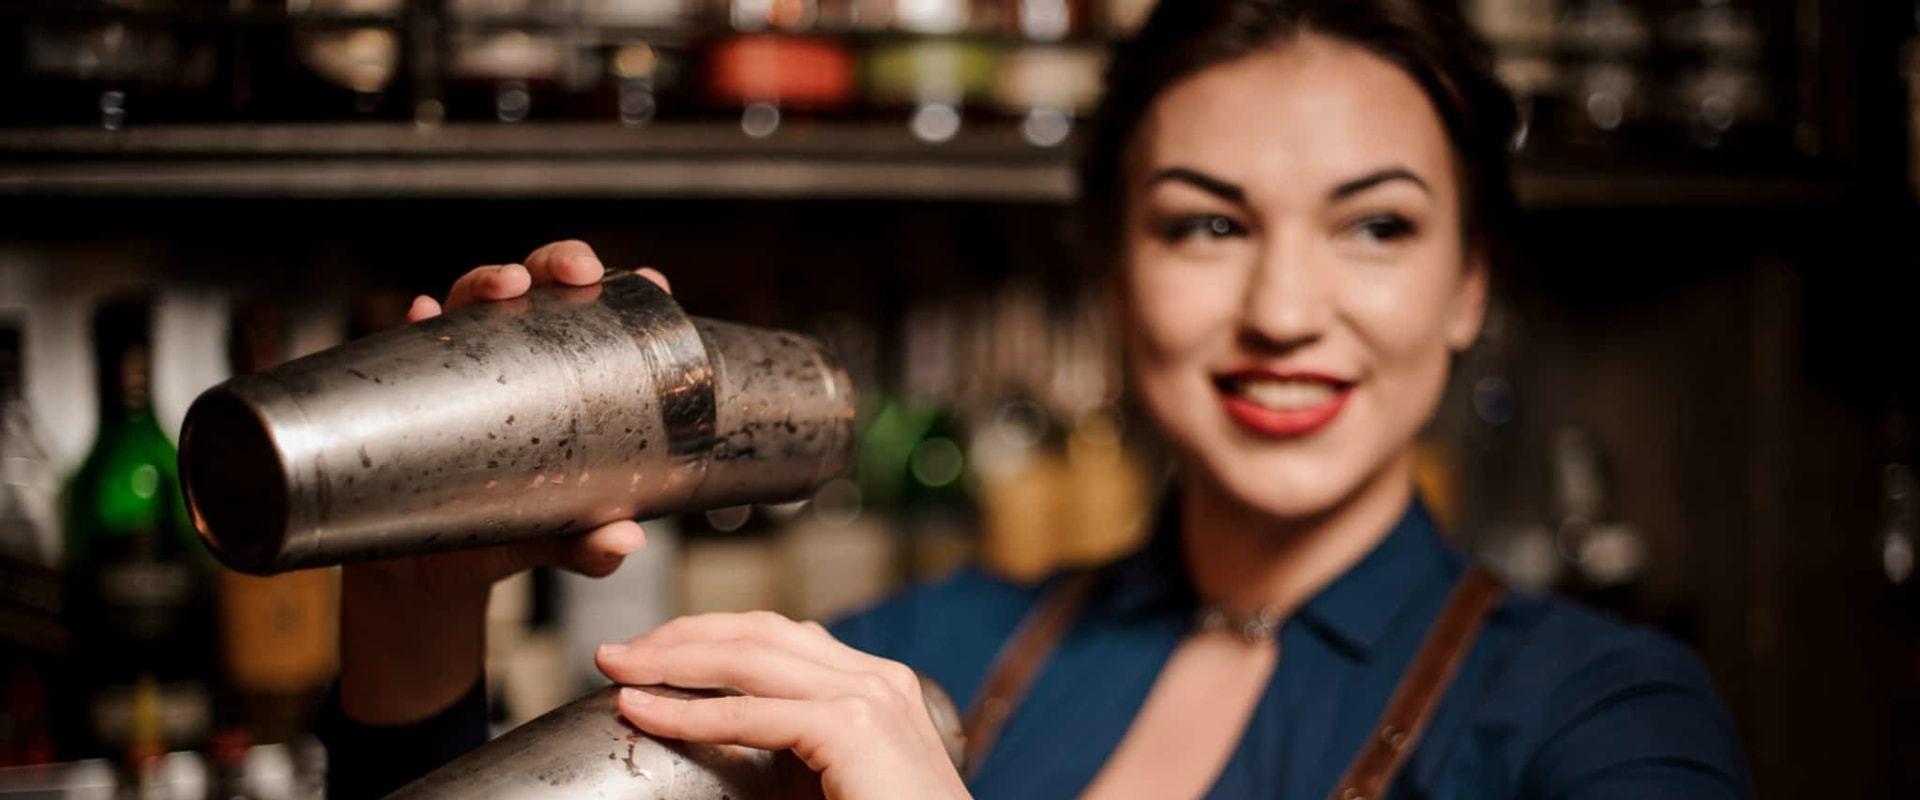 The Most Important Customer Service Skills for Bartenders